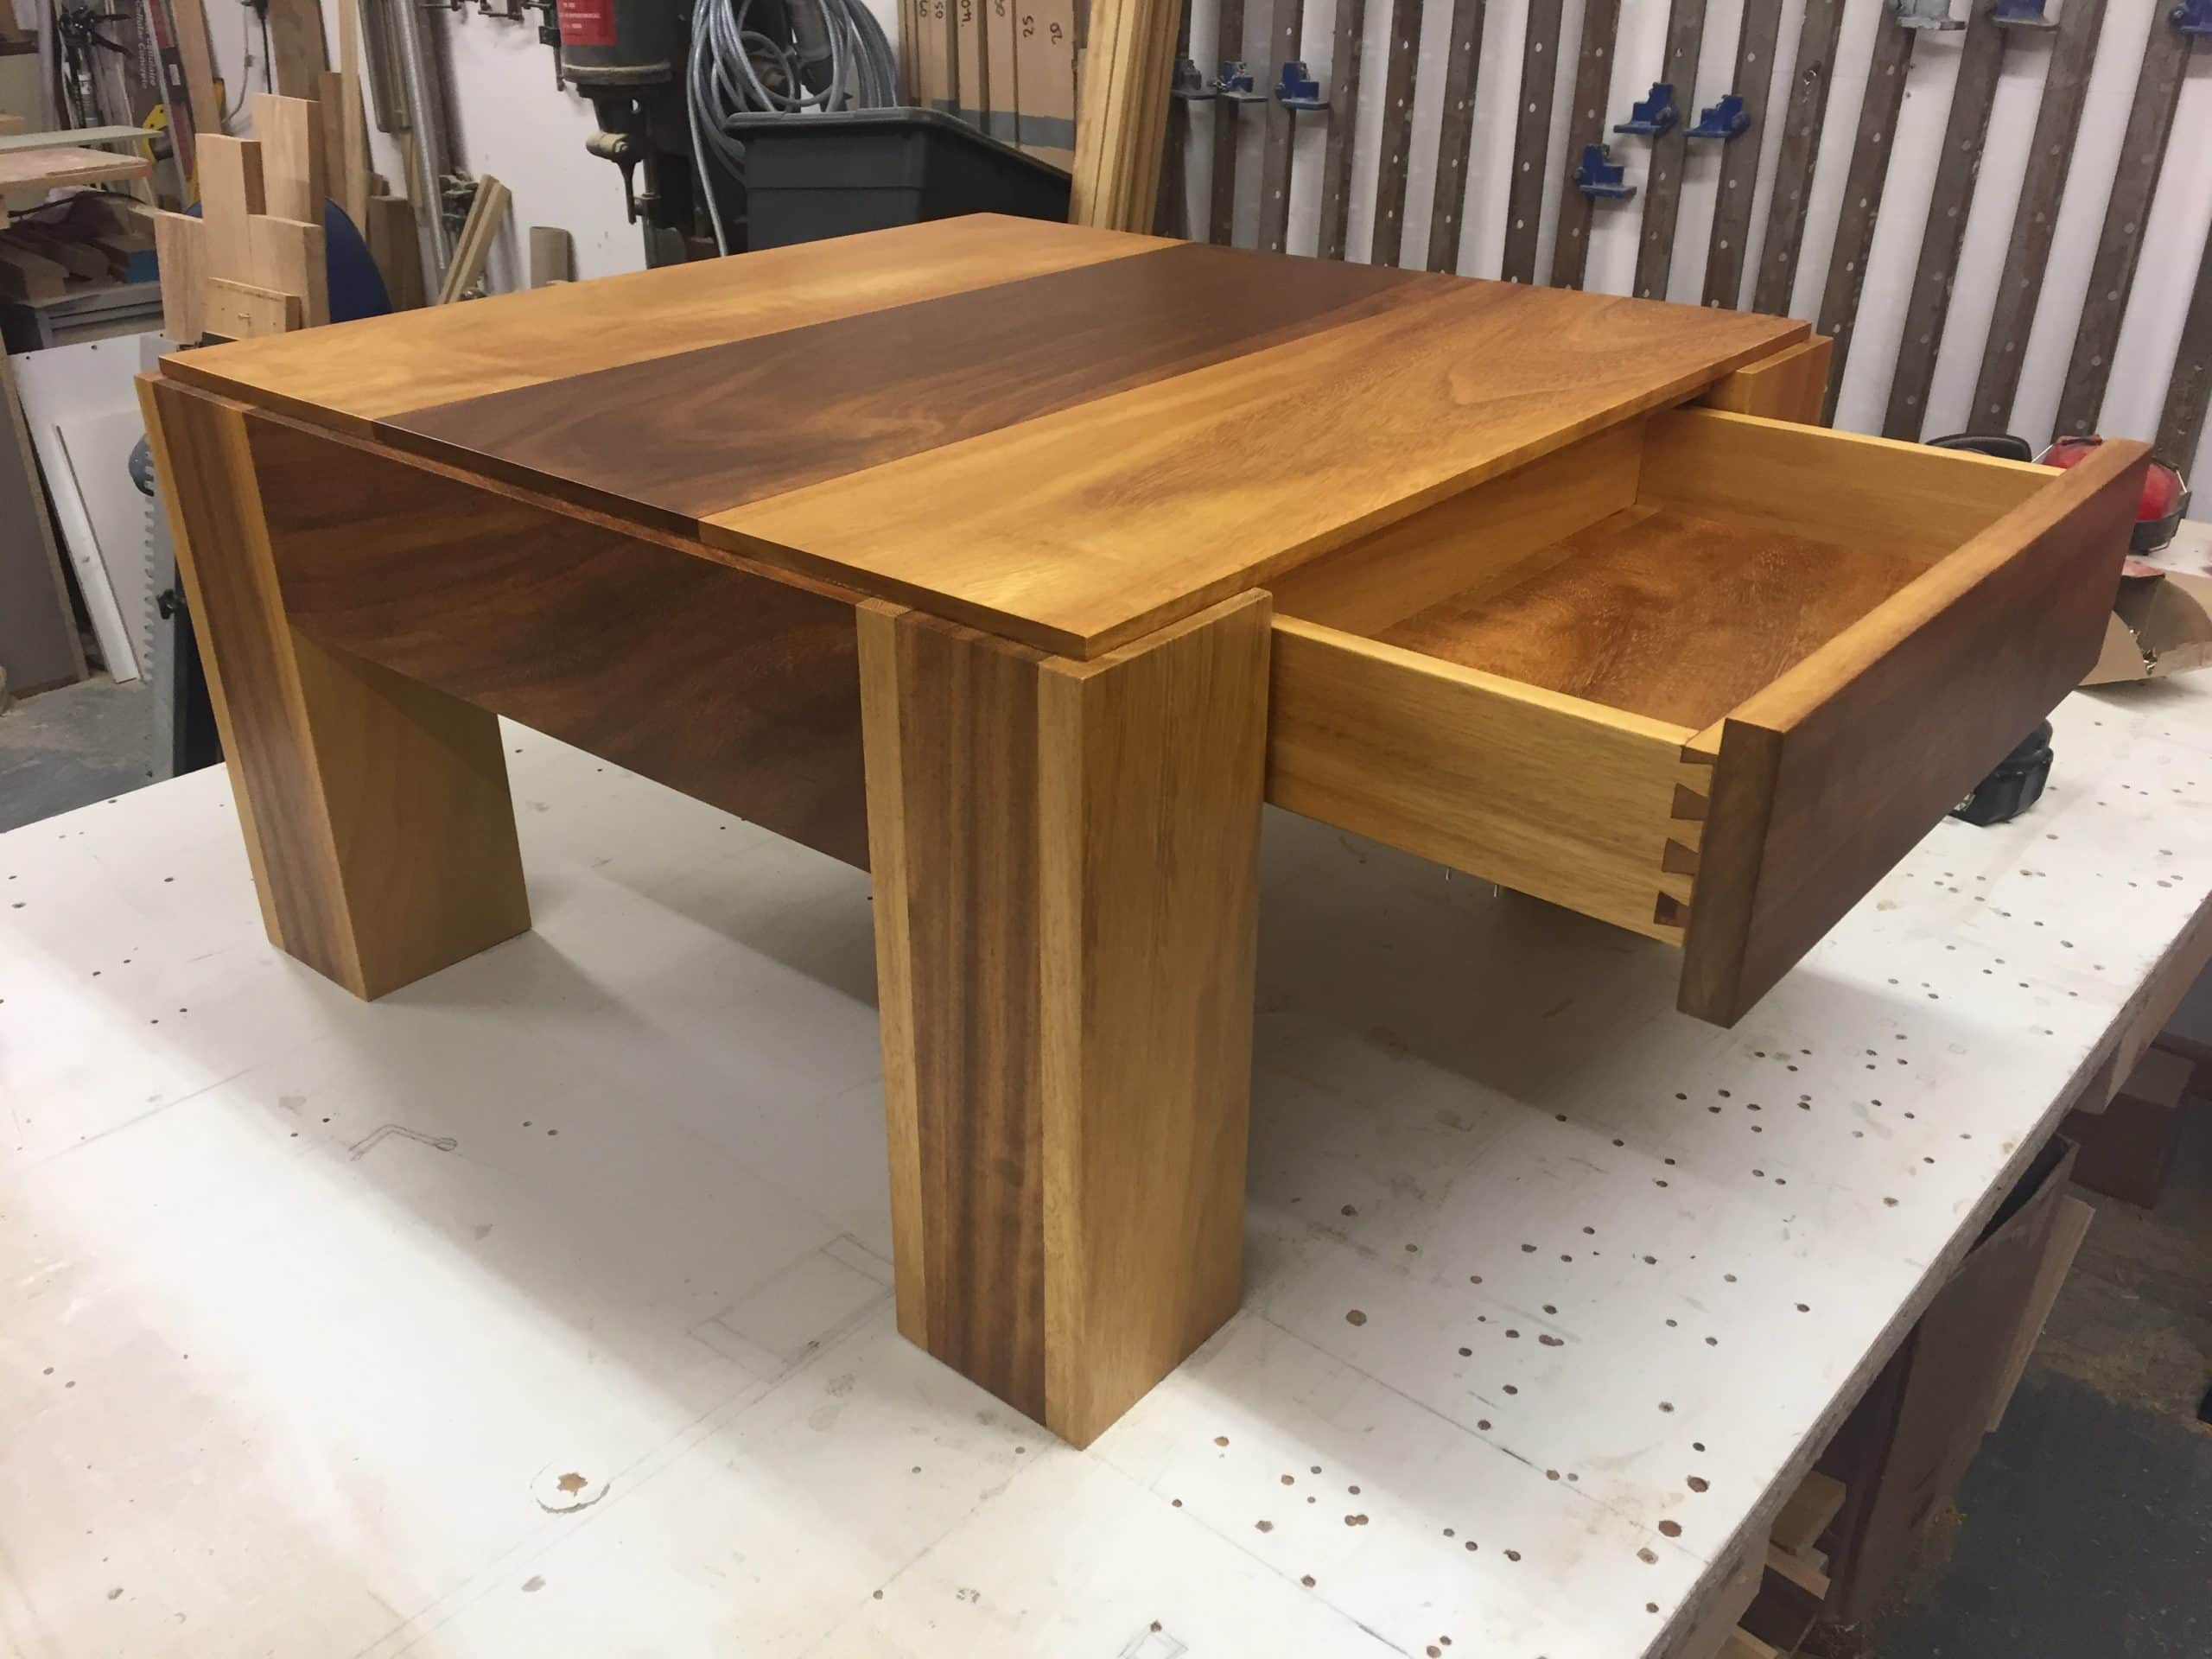 A custom made coffee table with an open drawer underneath